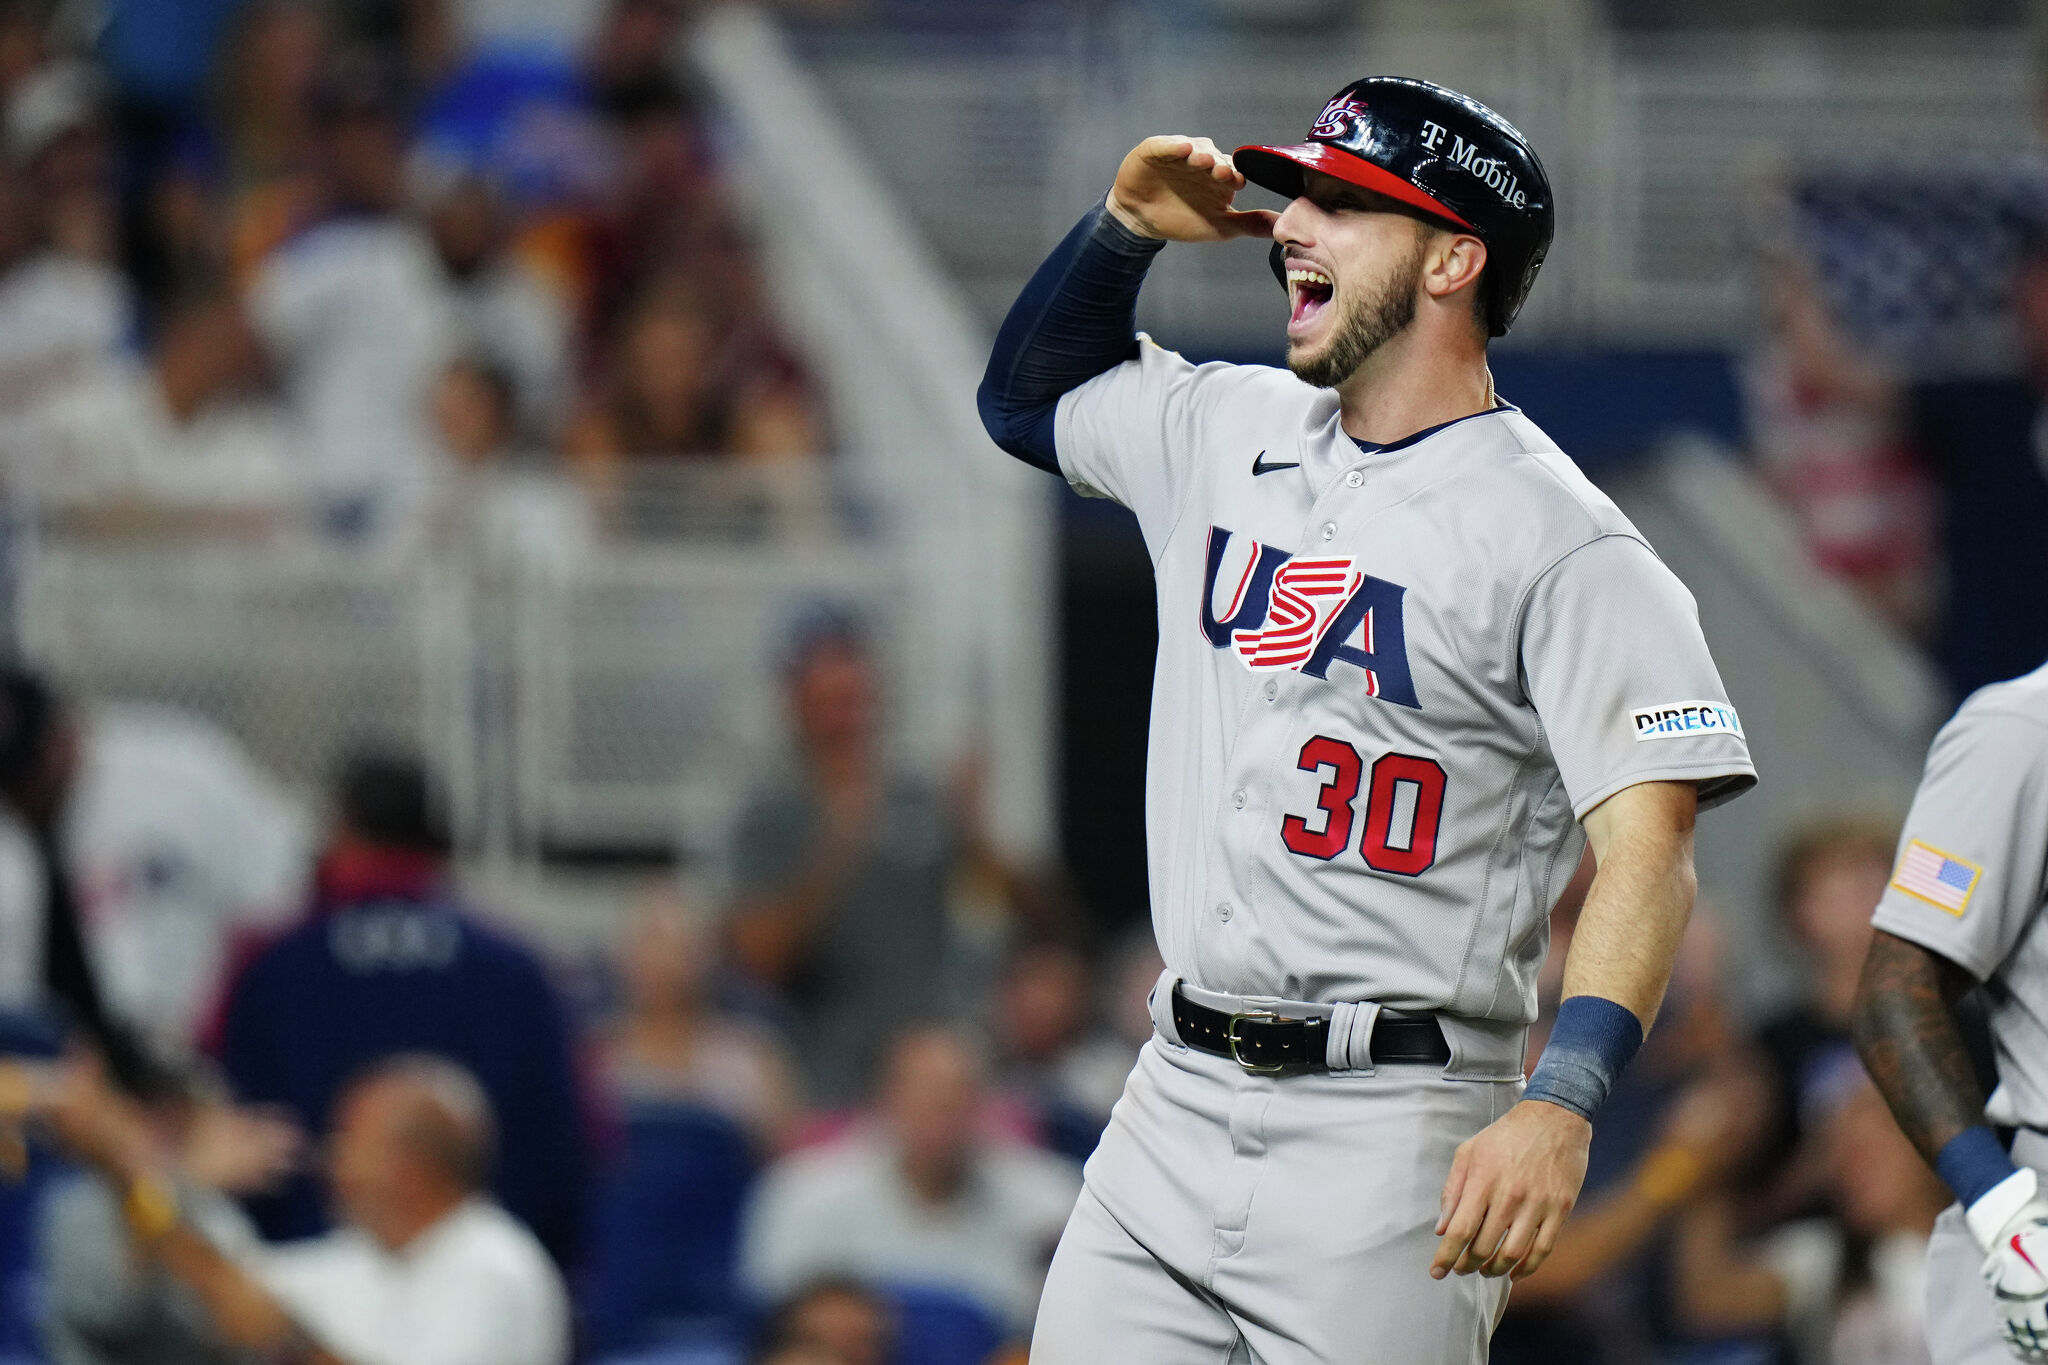 Jose Altuve singles against Astros in World Baseball Classic tune-up